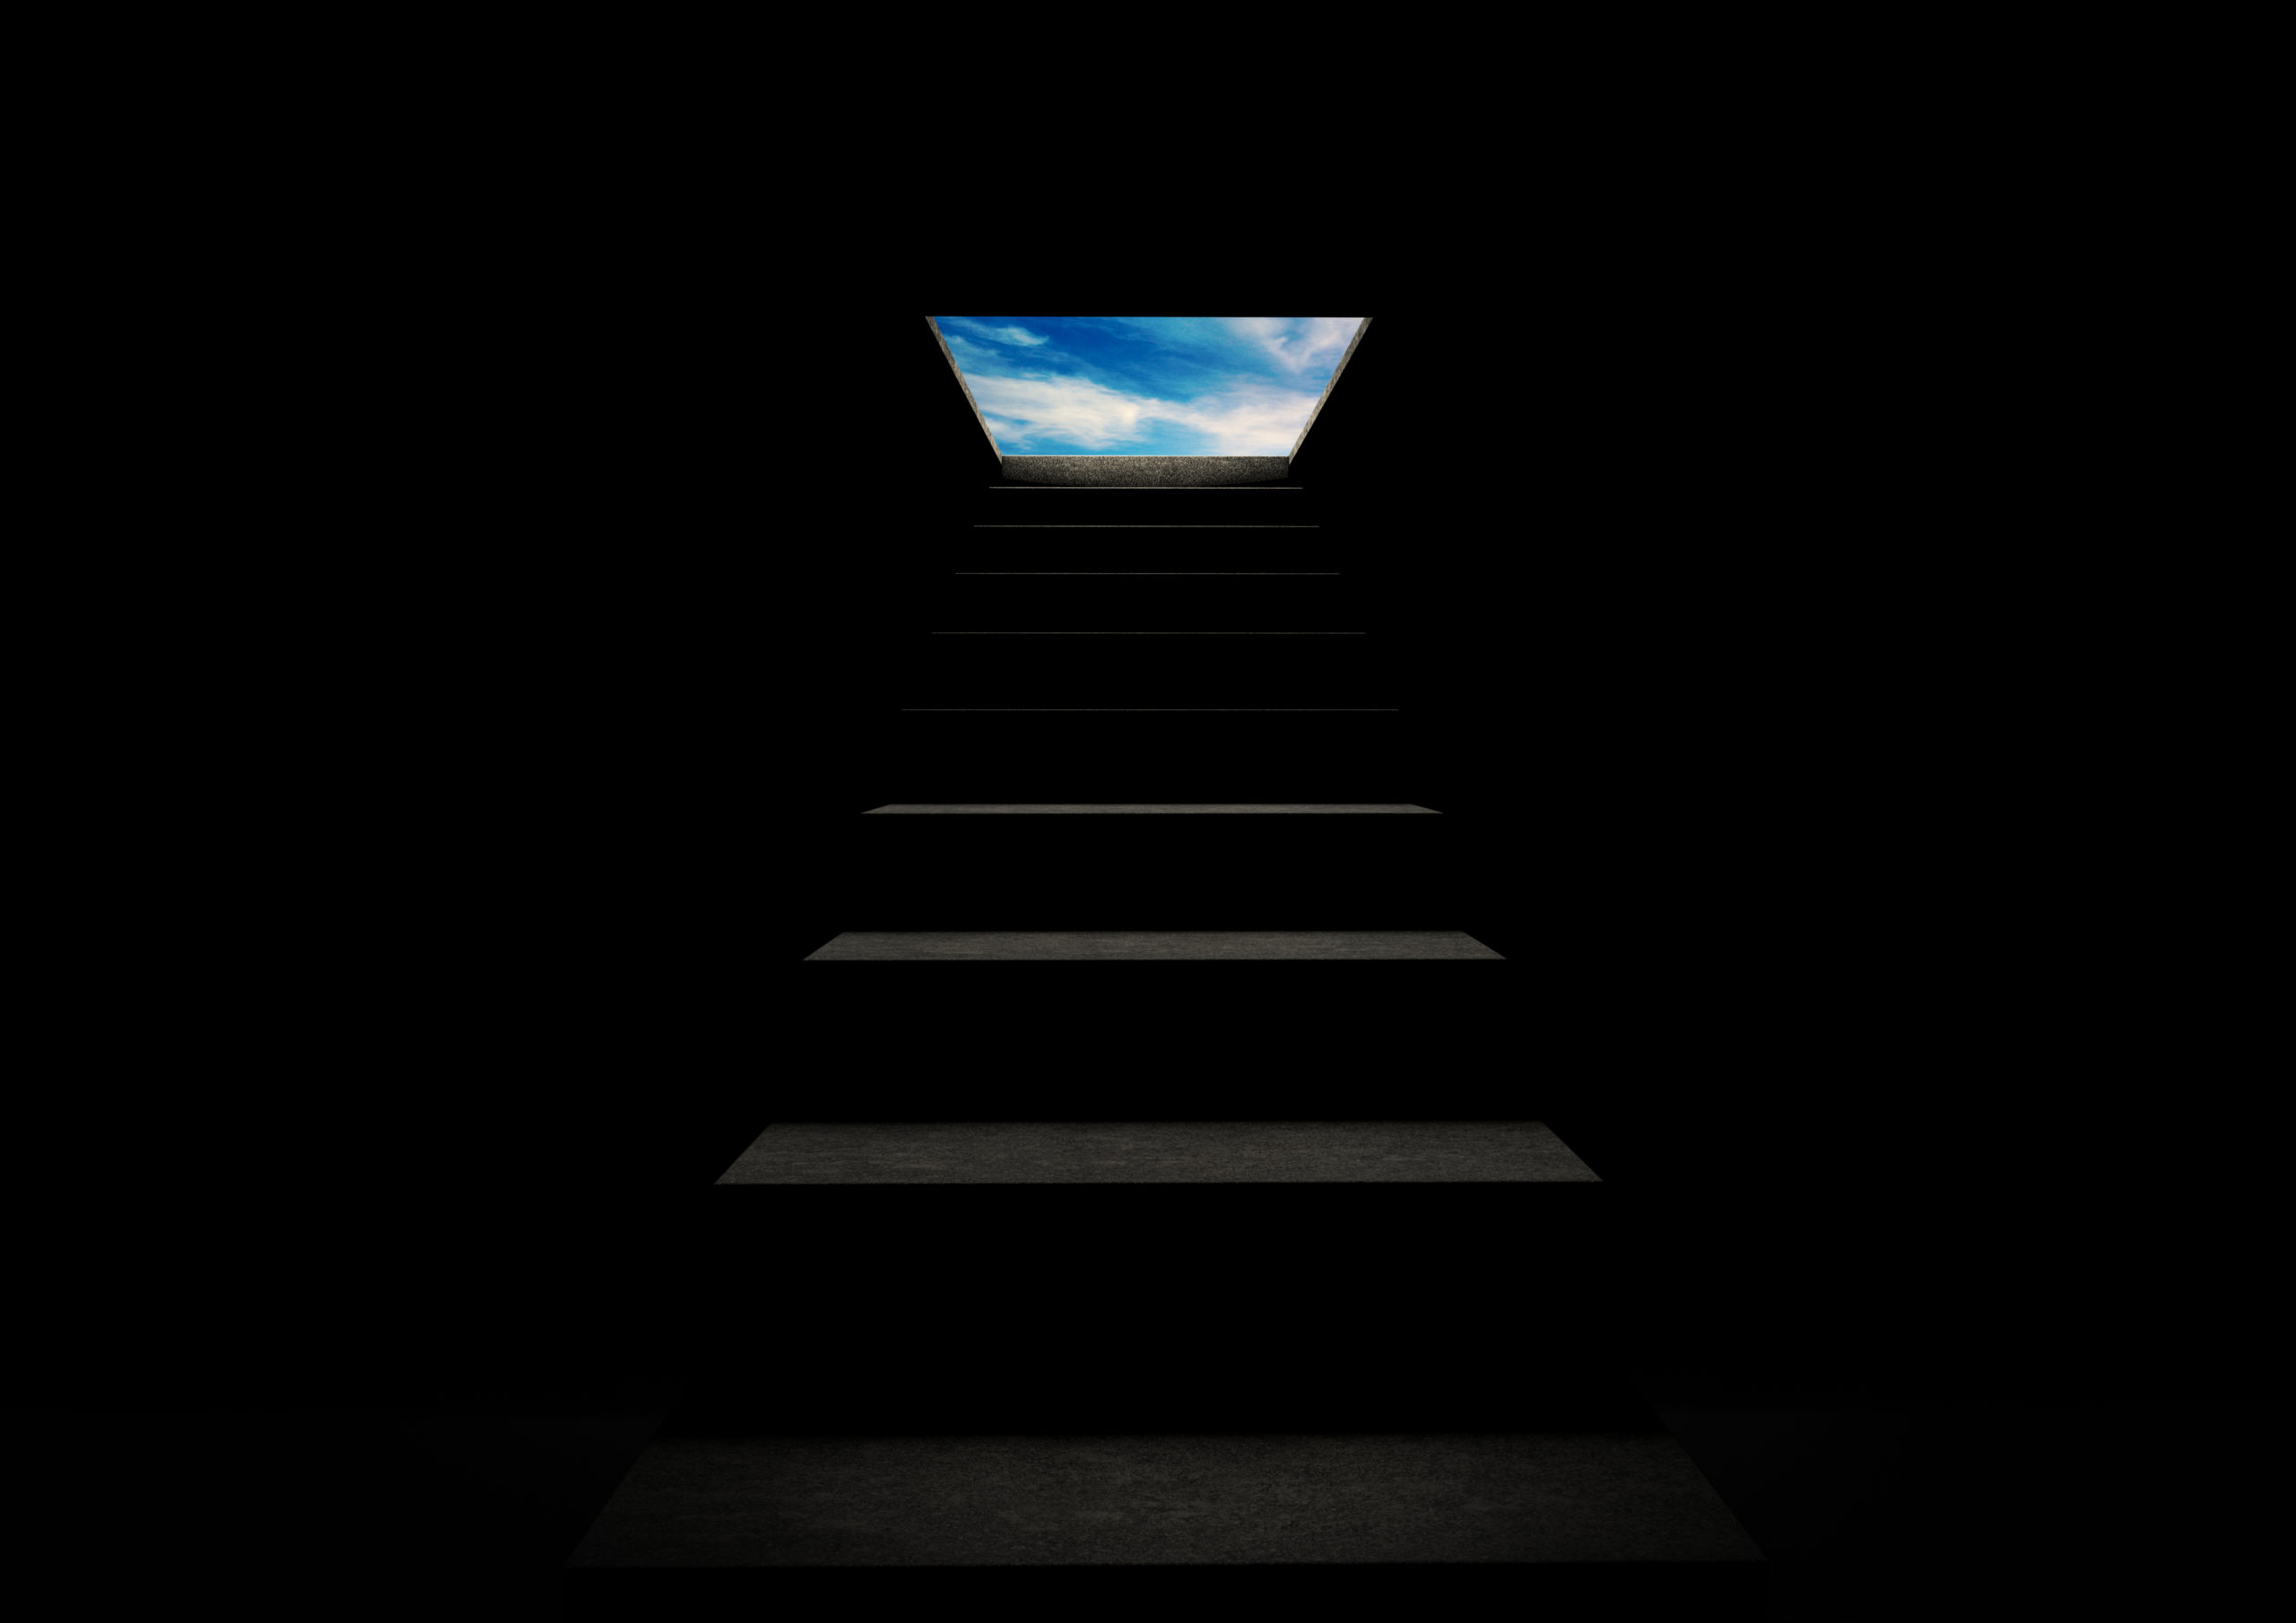 there is always an exit to light or an entrance to darkness